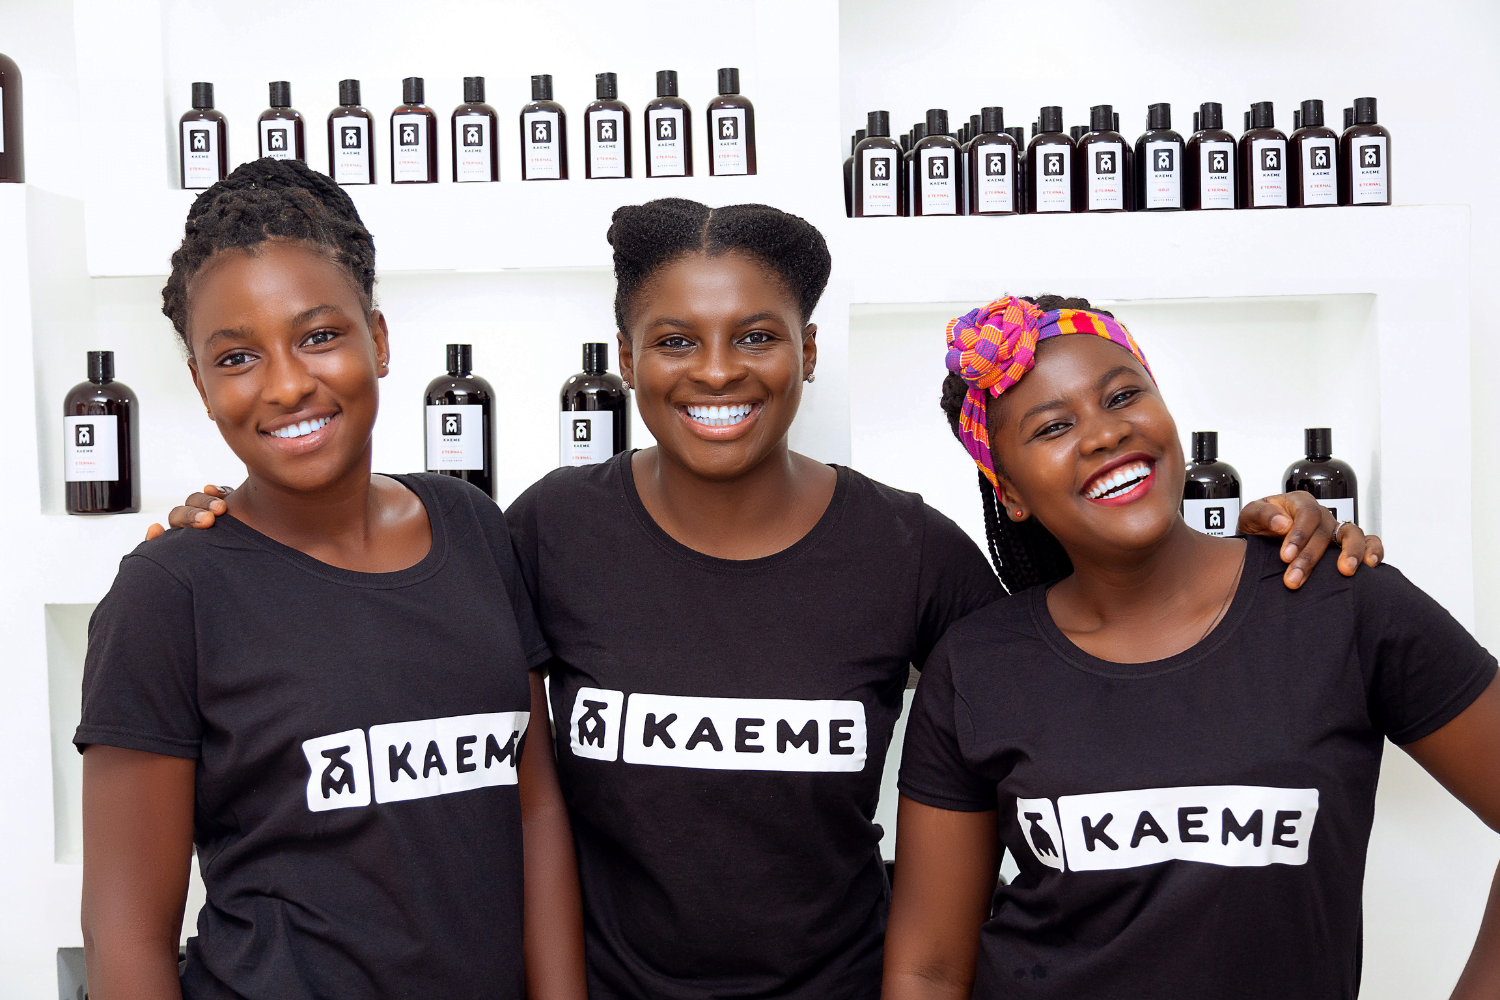 A Ghanaian woman entrepreneur stands between two other Ghanaian women. They are all wearing black shirts with the Kaeme logo.